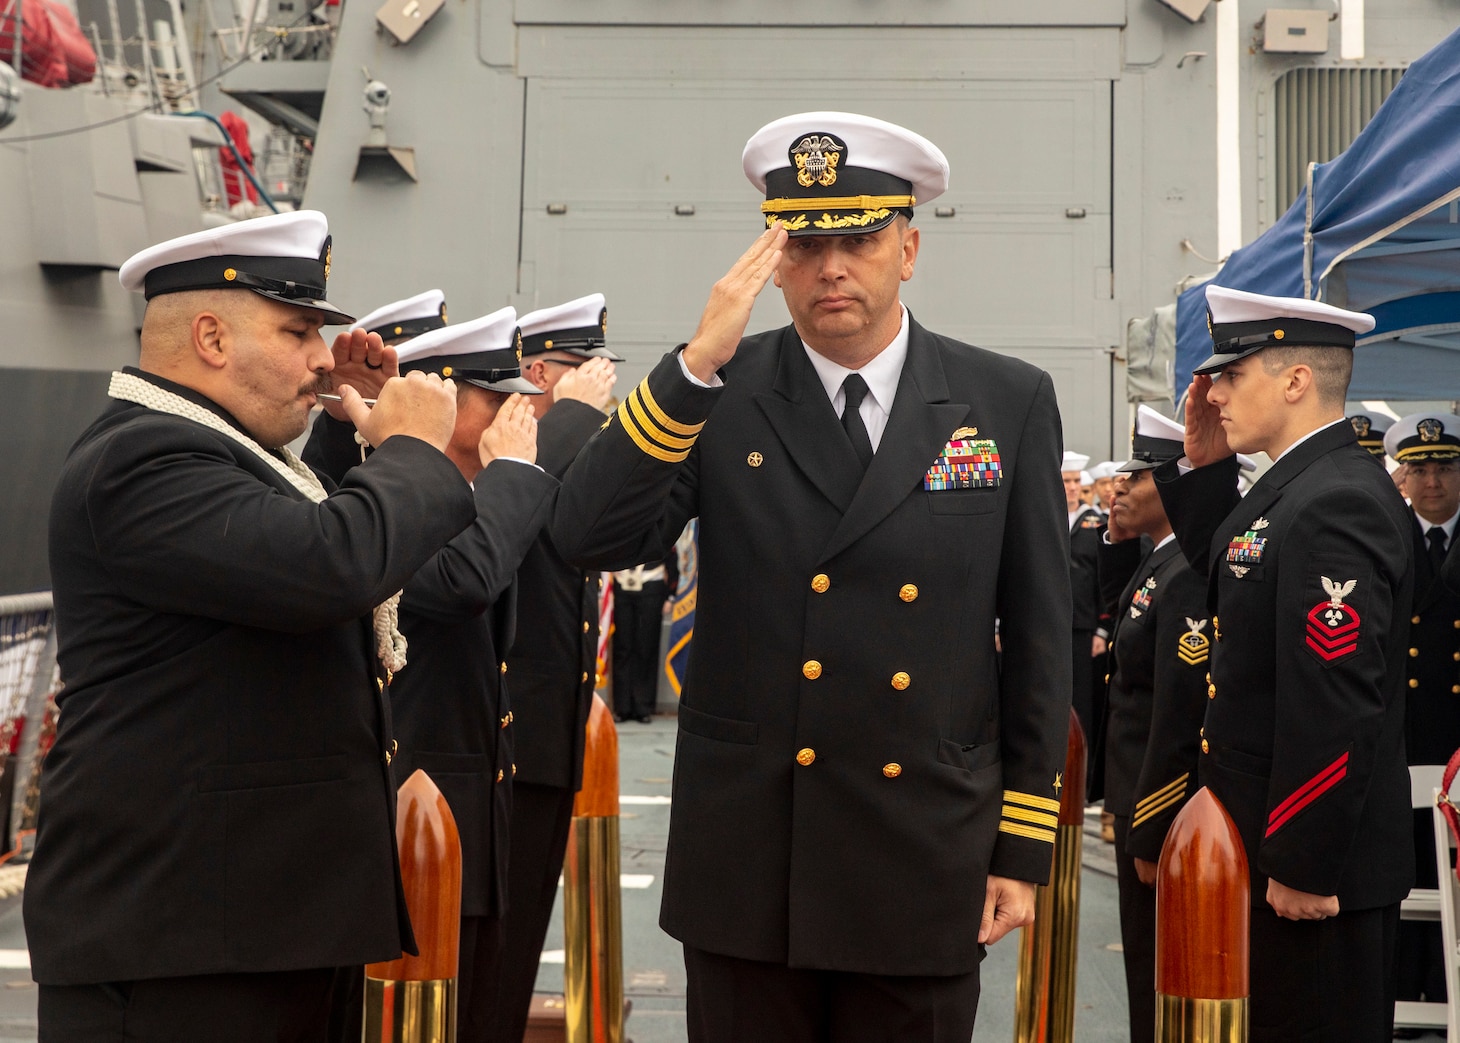 YOKOSUKA, Japan (Dec. 1, 2022) Cmdr. Travis Montplaisir, outgoing commanding officer of Arleigh Burke-class guided-missile destroyer USS Howard (DDG 83), salutes as he walks through sideboys during a change of command ceremony aboard the ship, forward-deployed to Commander, Fleet Activities Yokosuka, Dec. 1. Howard is assigned to Commander, Task Force 71/ Destroyer Squadron (DESRON) 15, the Navy’s largest forward-deployed DESRON and the U.S. 7th fleet’s principal surface force. (U.S. Navy photo by Mass Communication Specialist 2nd Class Samantha Oblander)